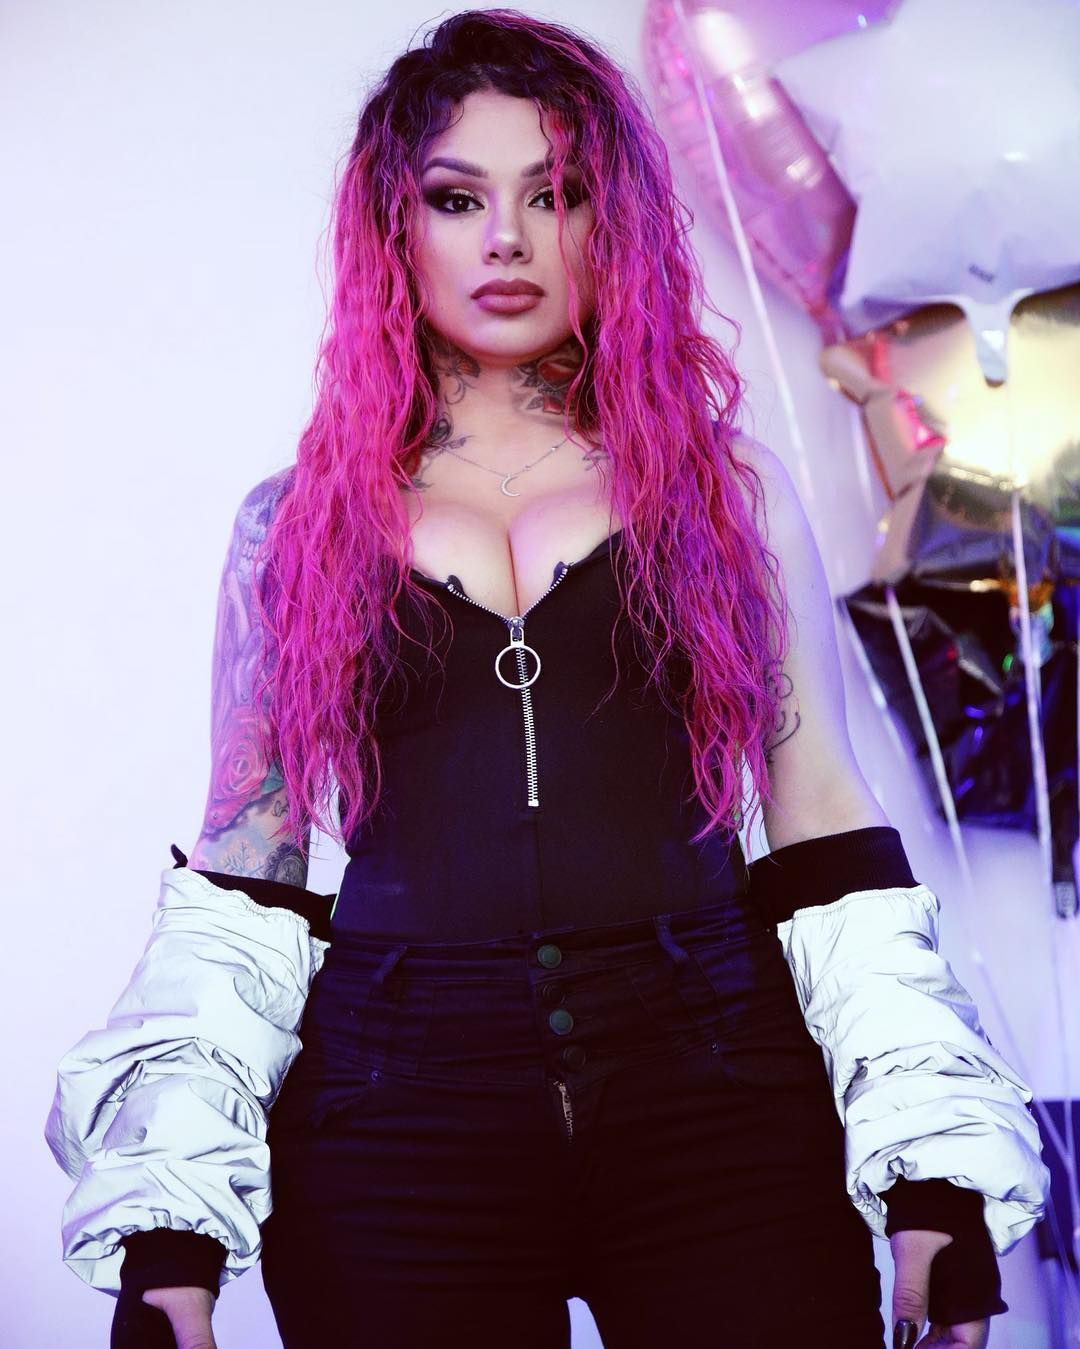 Snow Tha Product Wallpapers - Wallpaper Cave.